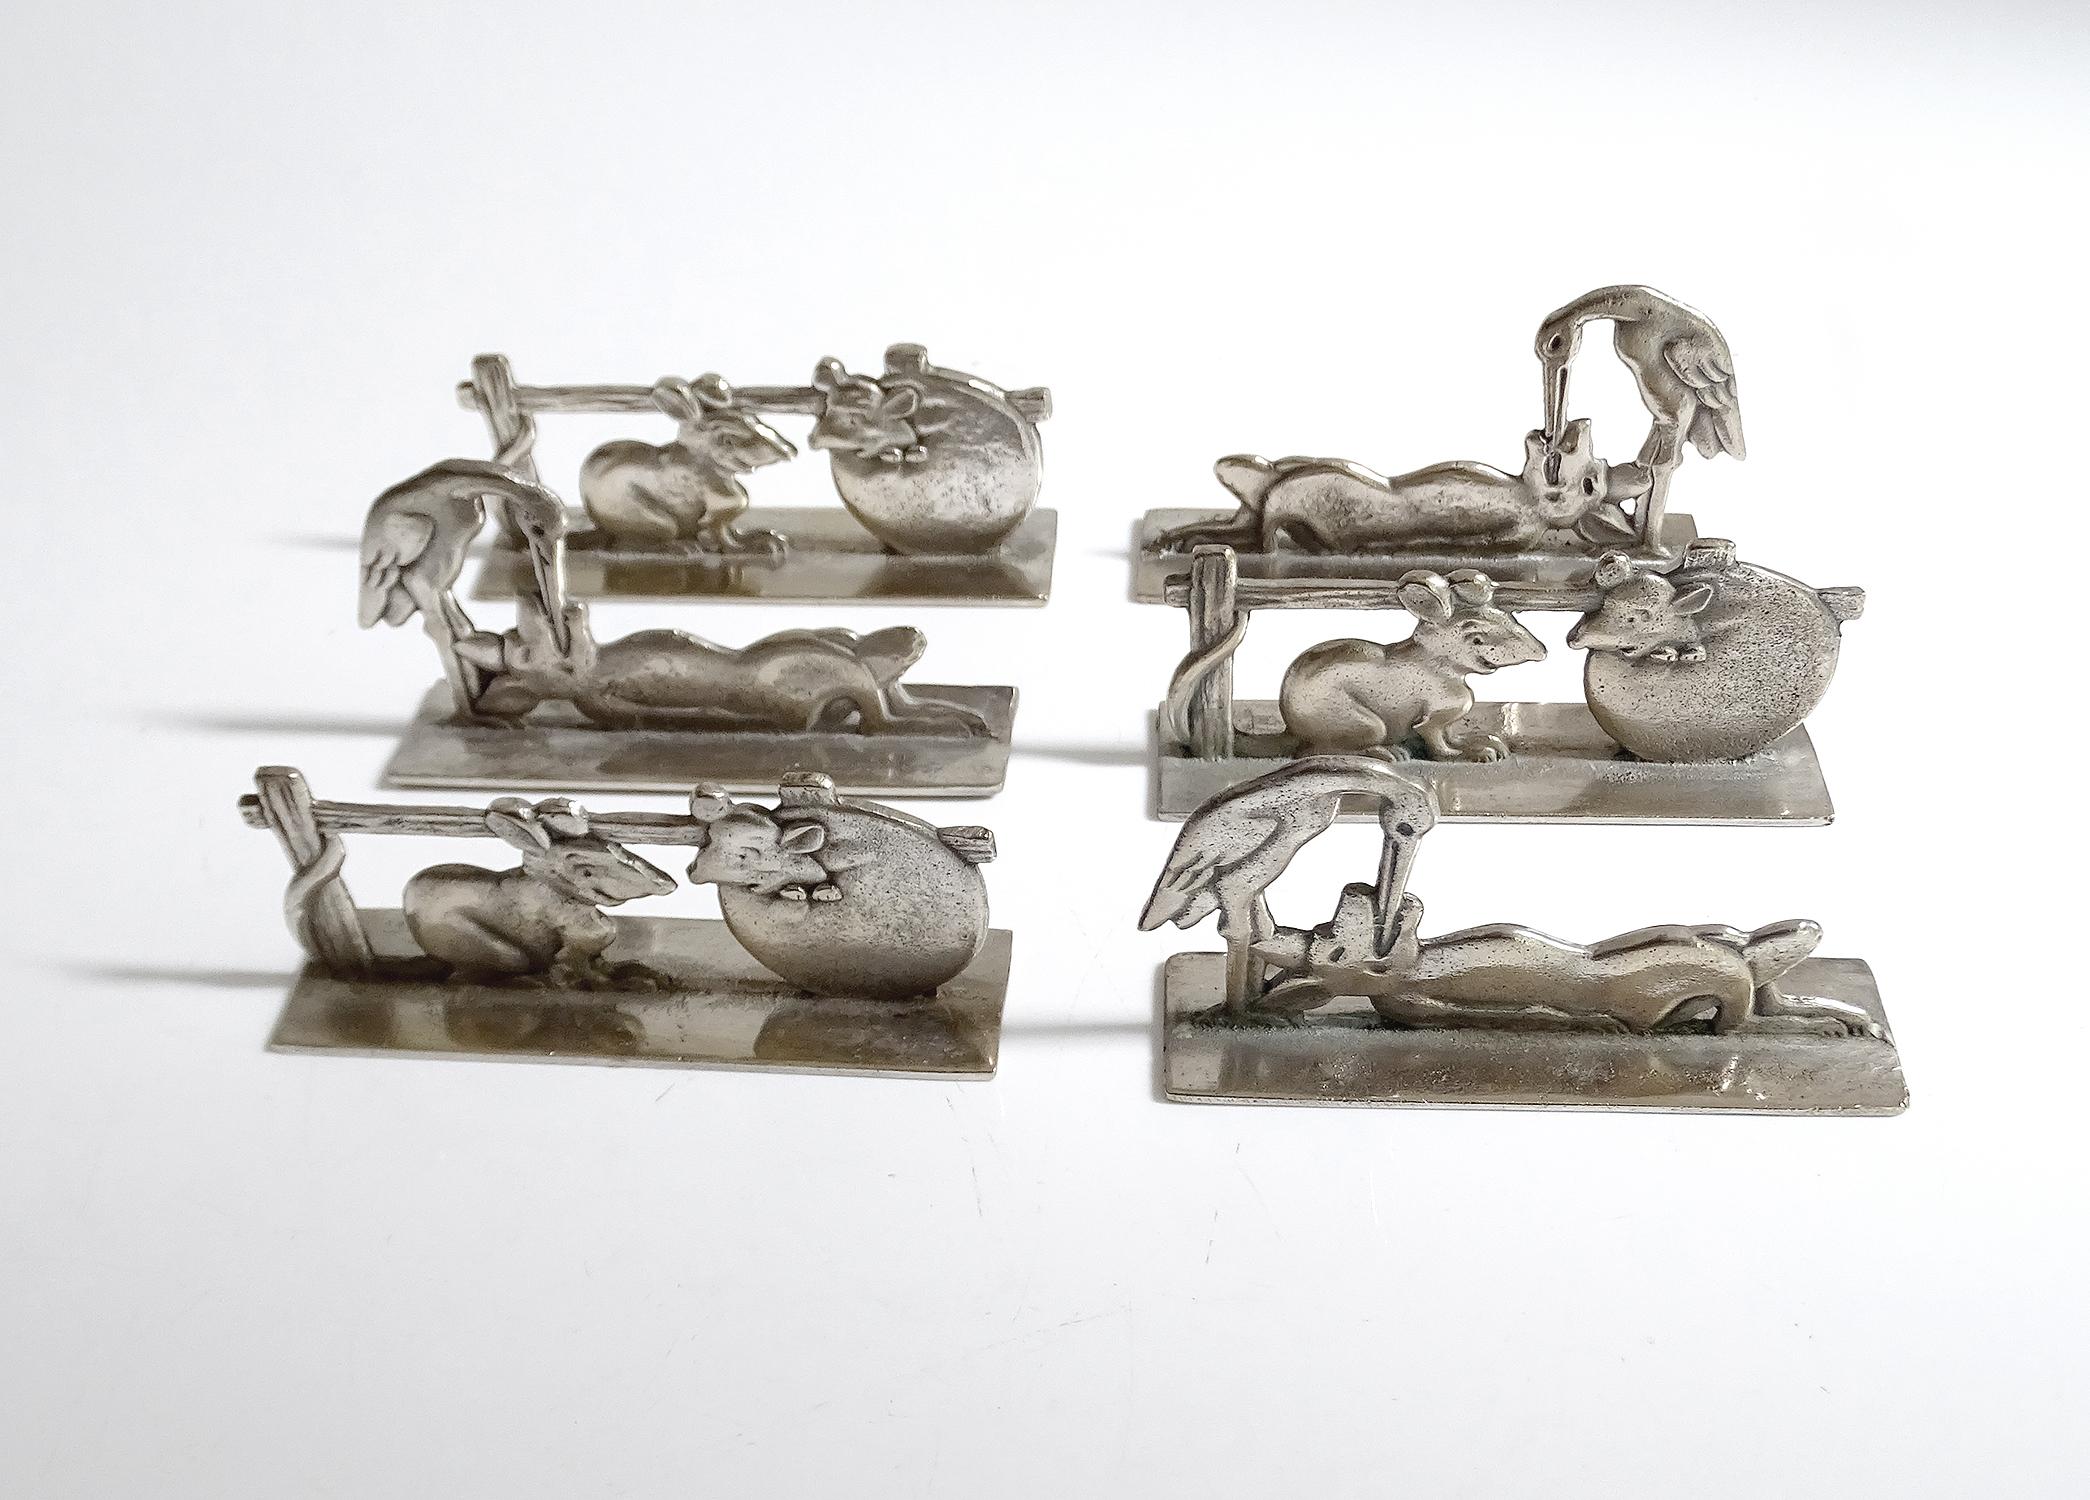 Set of six French silver plated bronze Art Deco knife rests manufactured circa 1930-1935 based on the fables of La Fontaine and designed by Benjamin Rabier (a famous French cartoonist of the 1930s). The knife rests have different sizes, the